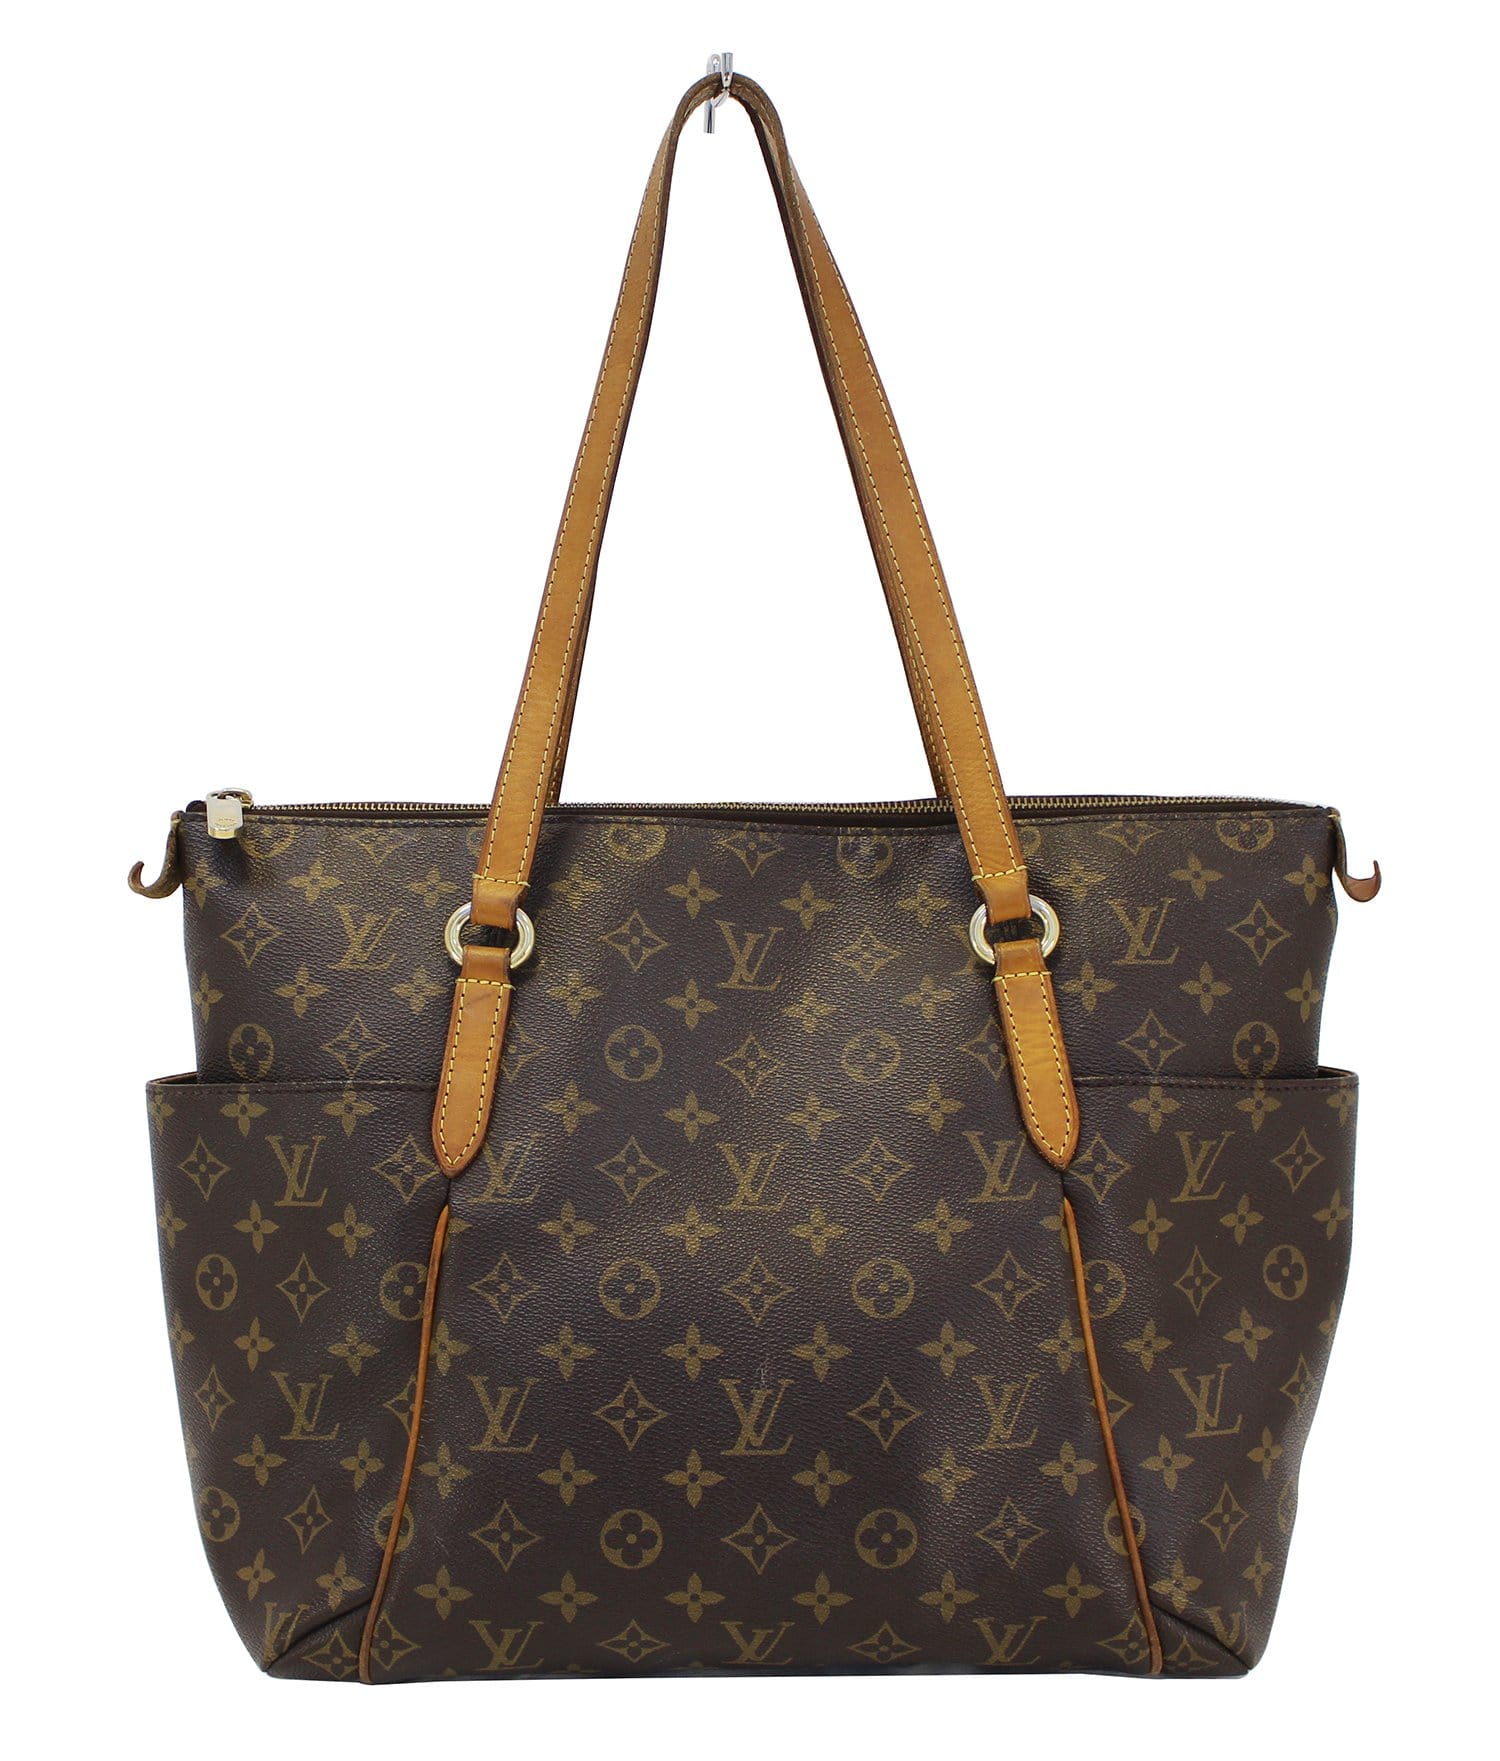 Louis Vuitton, Bags, Louis Vuitton Lv Large Shopping Tote Bag Crossbody  Bag With Pvc Bag Twilly